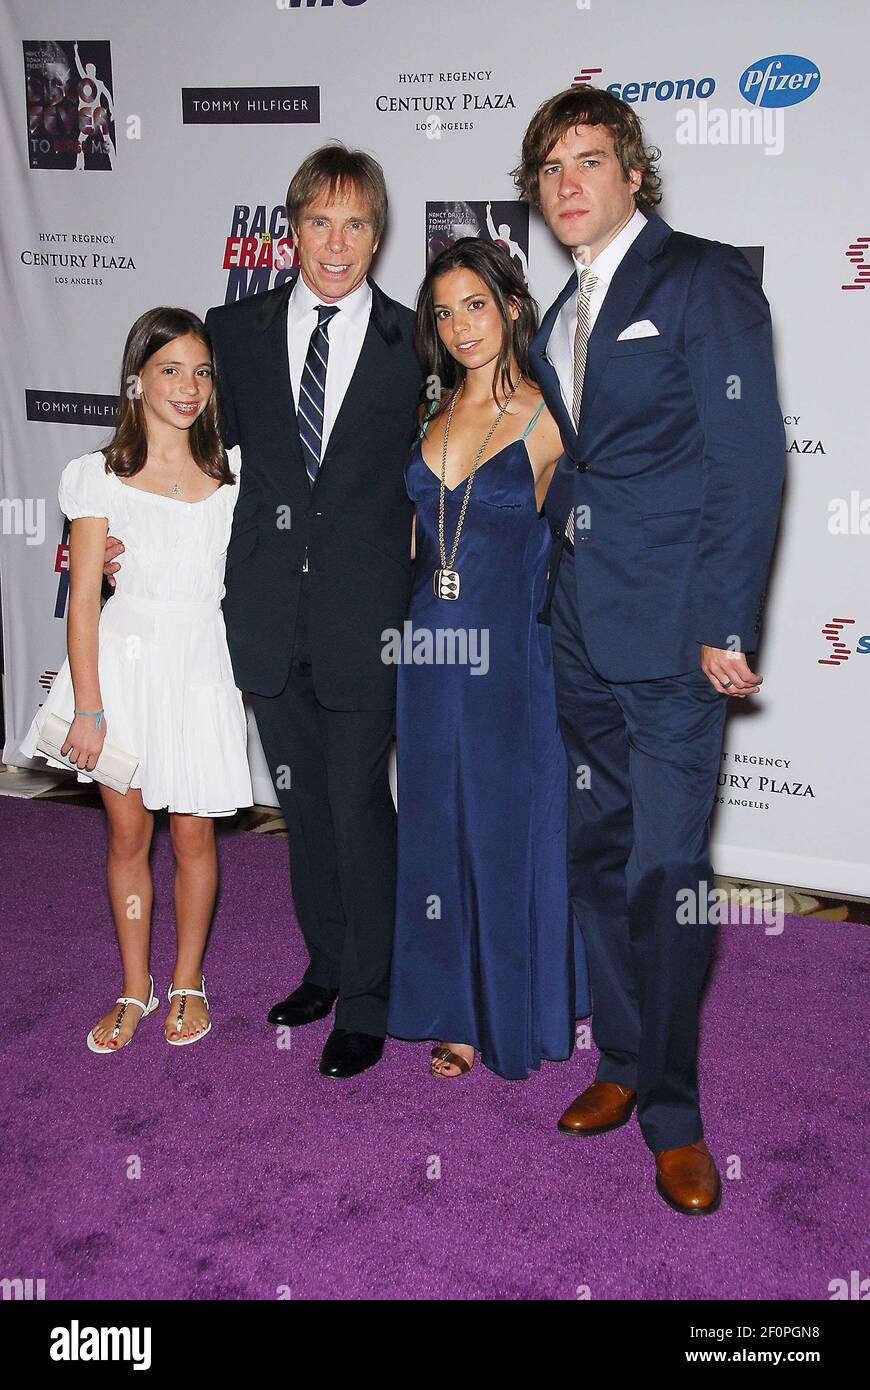 12 May 2006 - Century City, California - Tommy Hilfiger and family. 13th  Annual Race to Erase MS Sponsored by Nancy Davis and Tommy Hilfiger -  Arrivals at the Hyatt Regency Century